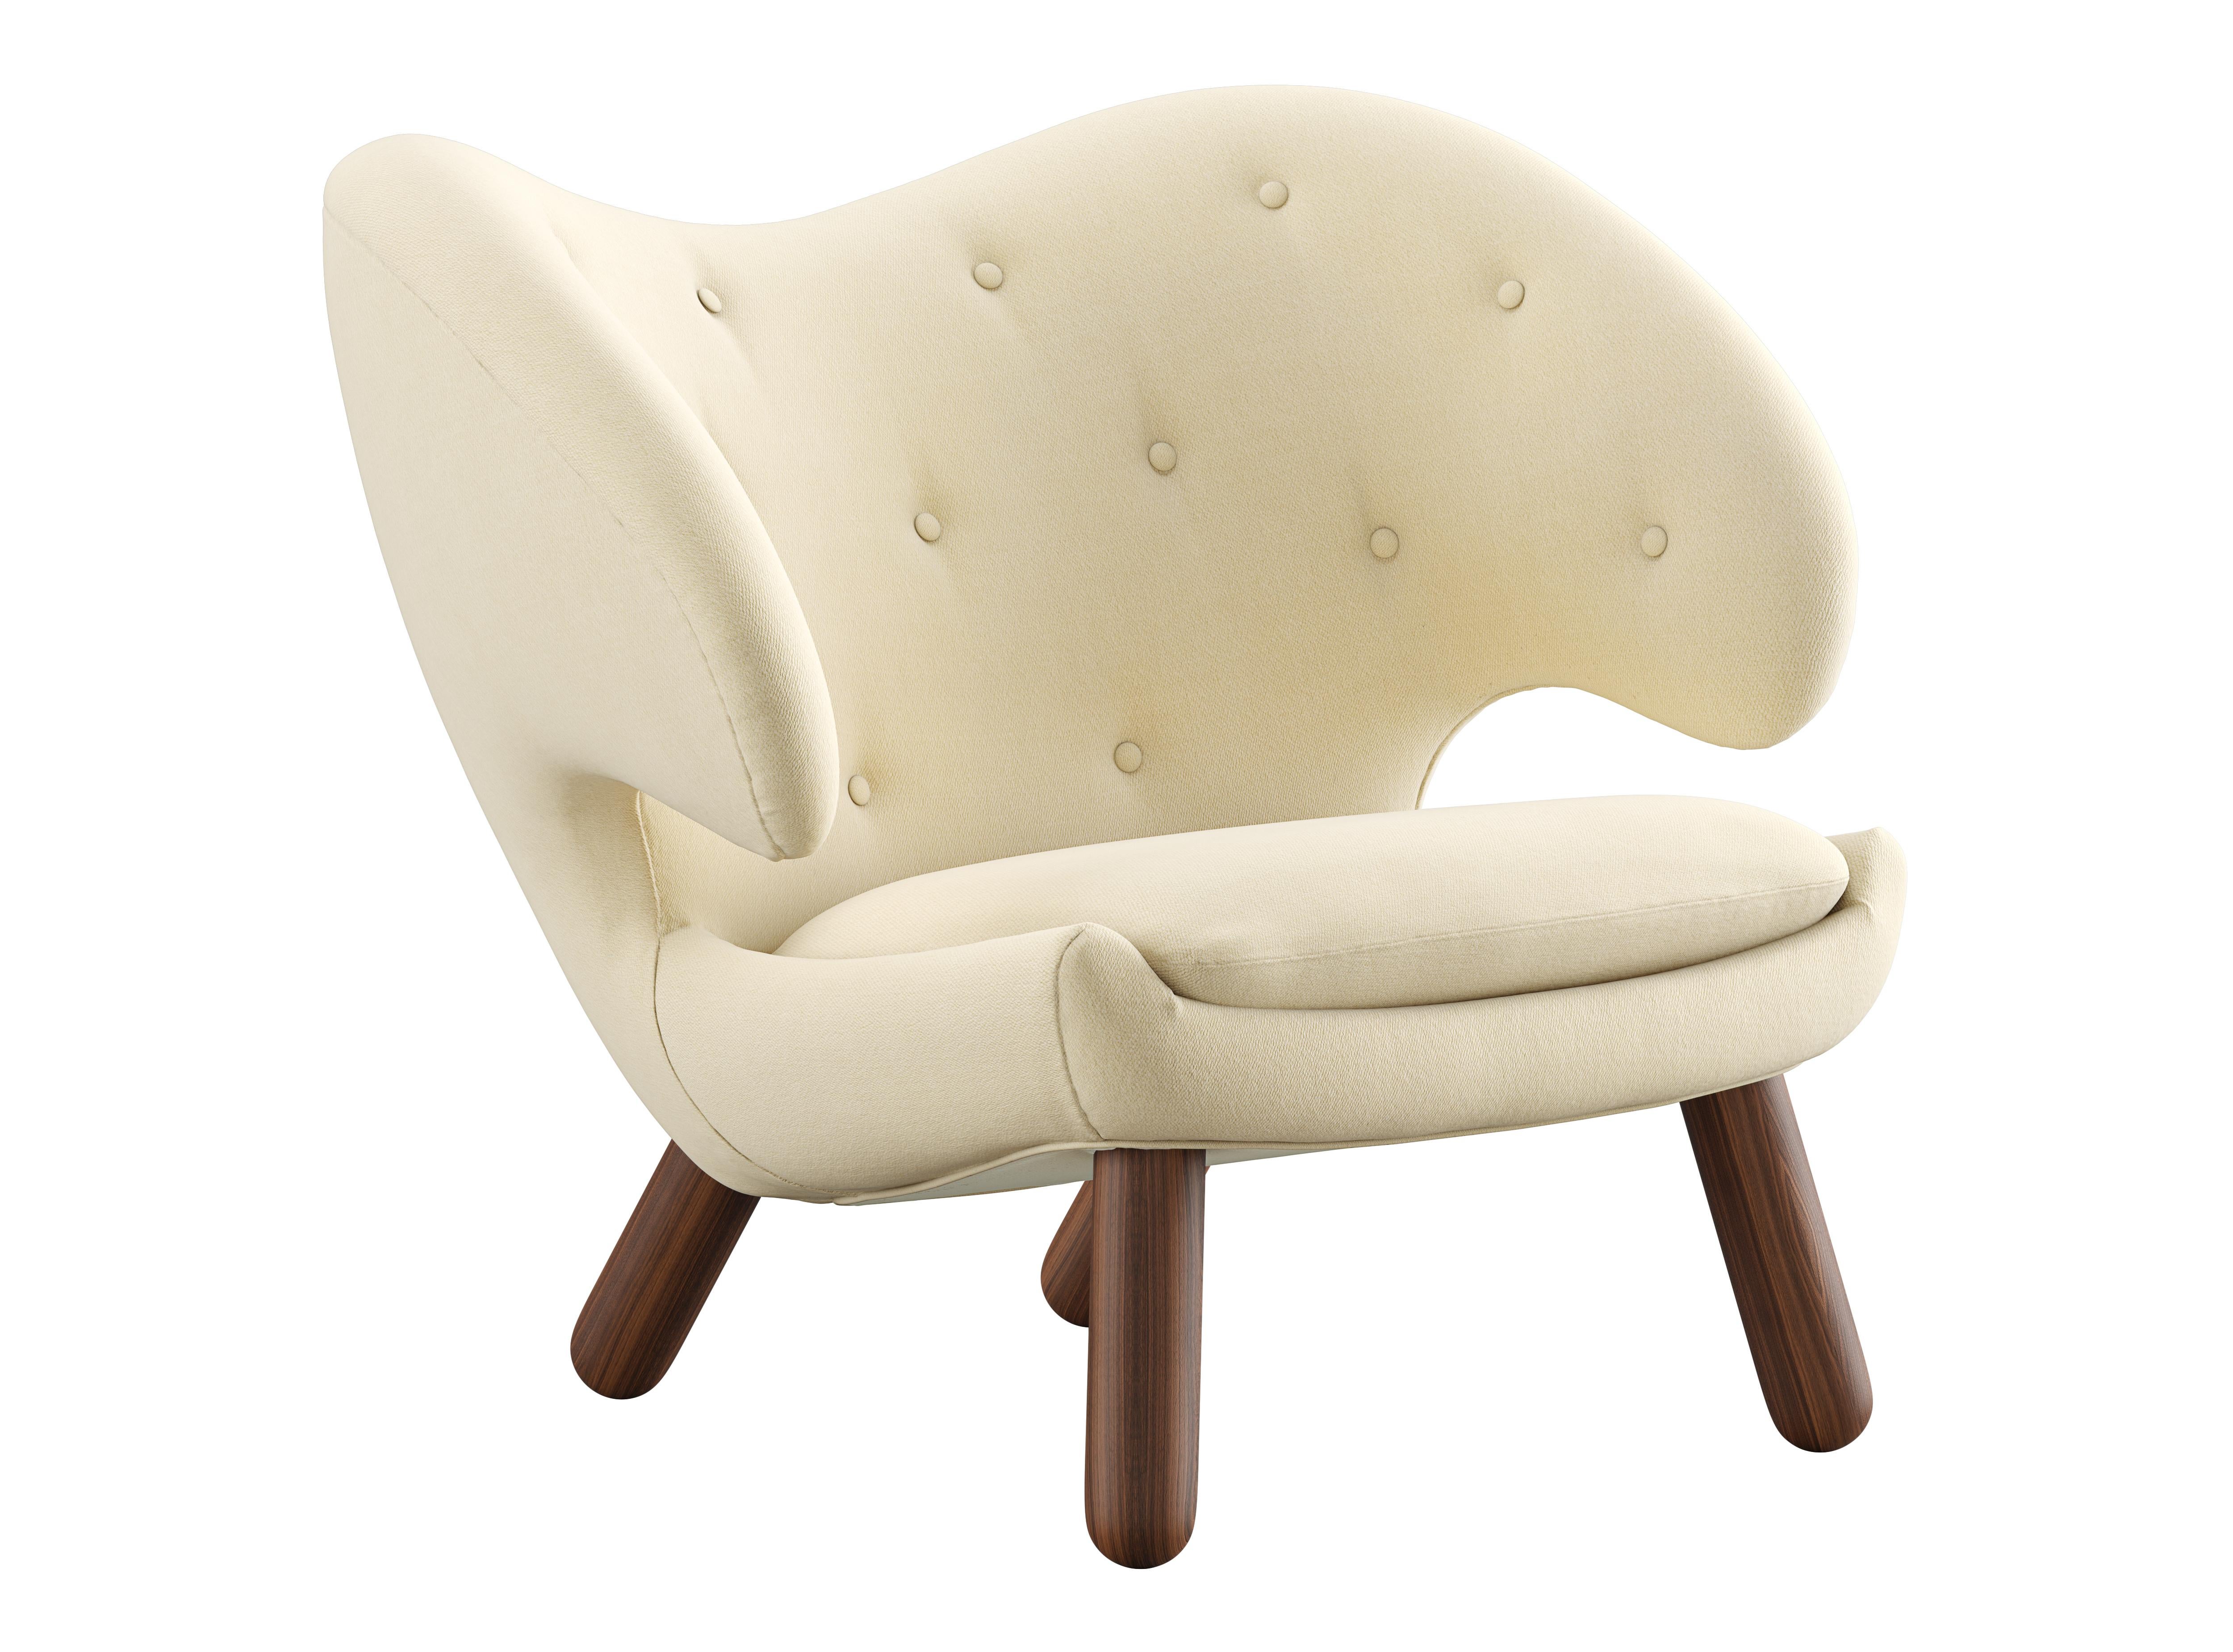 Modern Finn Juhl Pelican Chair Upholstered in Wood and Fabric